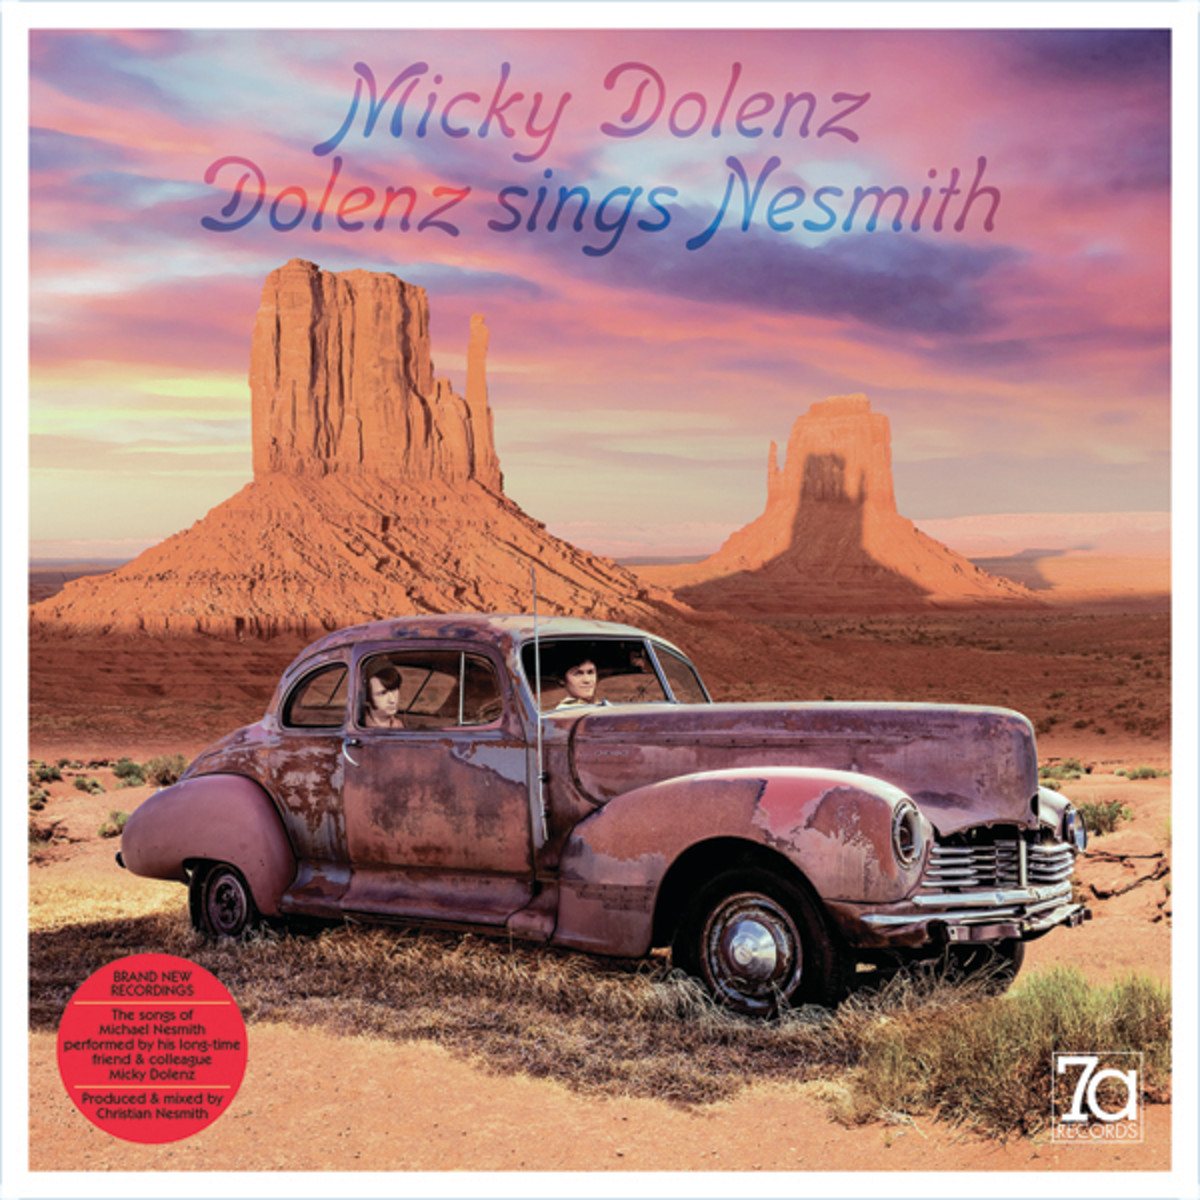 The Goldmine Store has a TURQUOISE Dolenz Sings Nesmith vinyl LP. Click Here to buy.